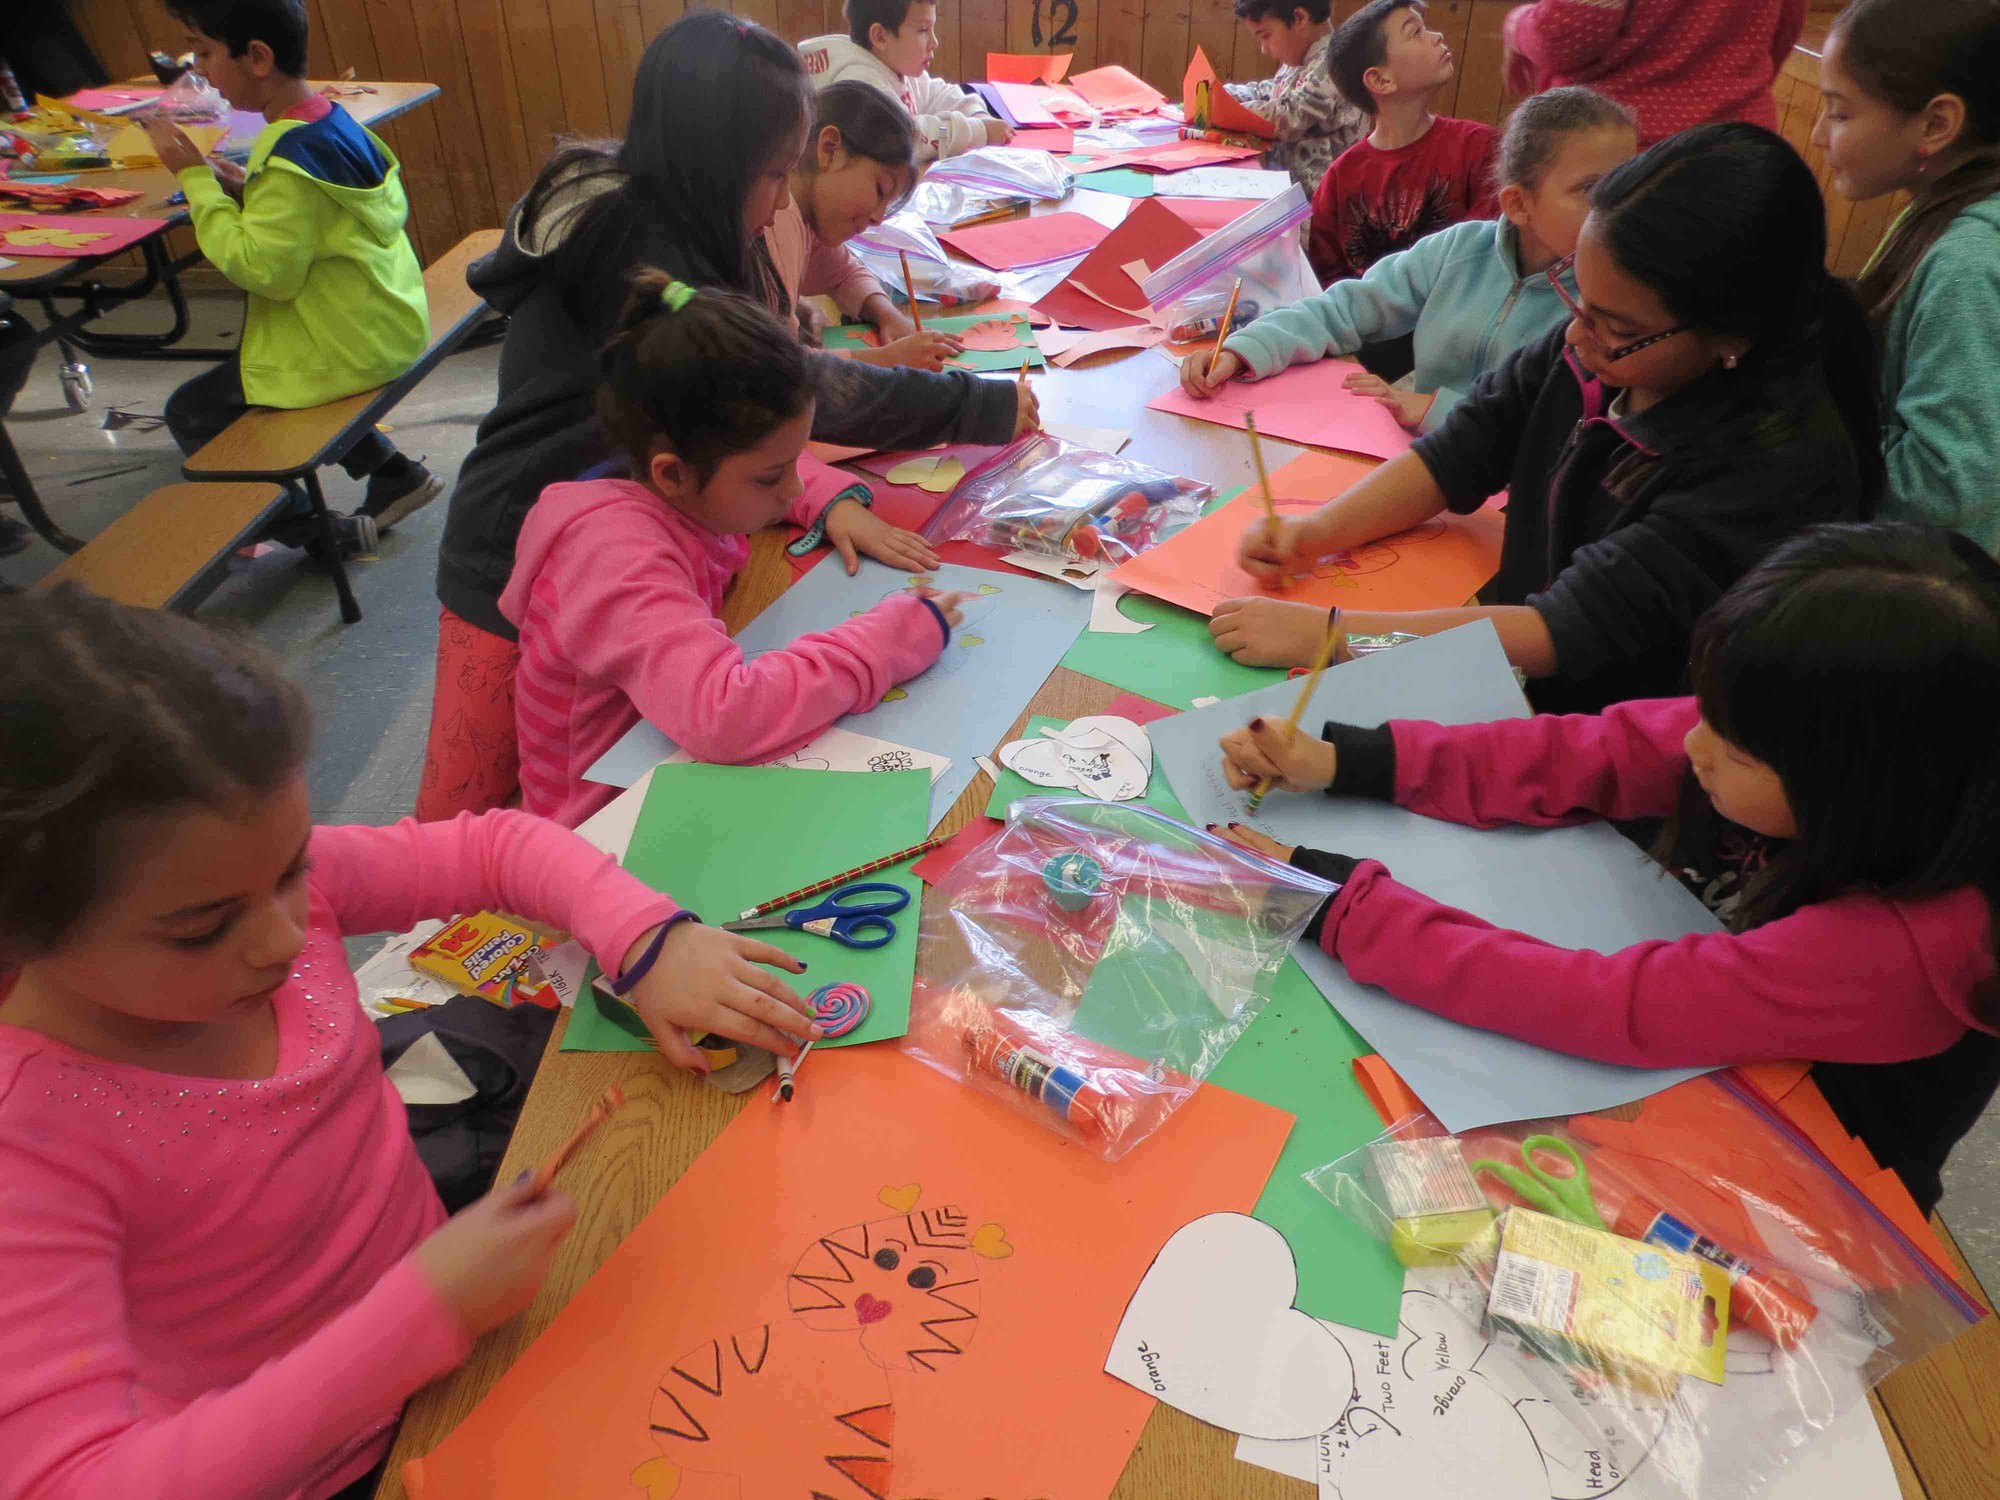 The students happily made cards for children at Stony Brook University Hospital recently; they will be sent to the patients for Valentine’s Day.